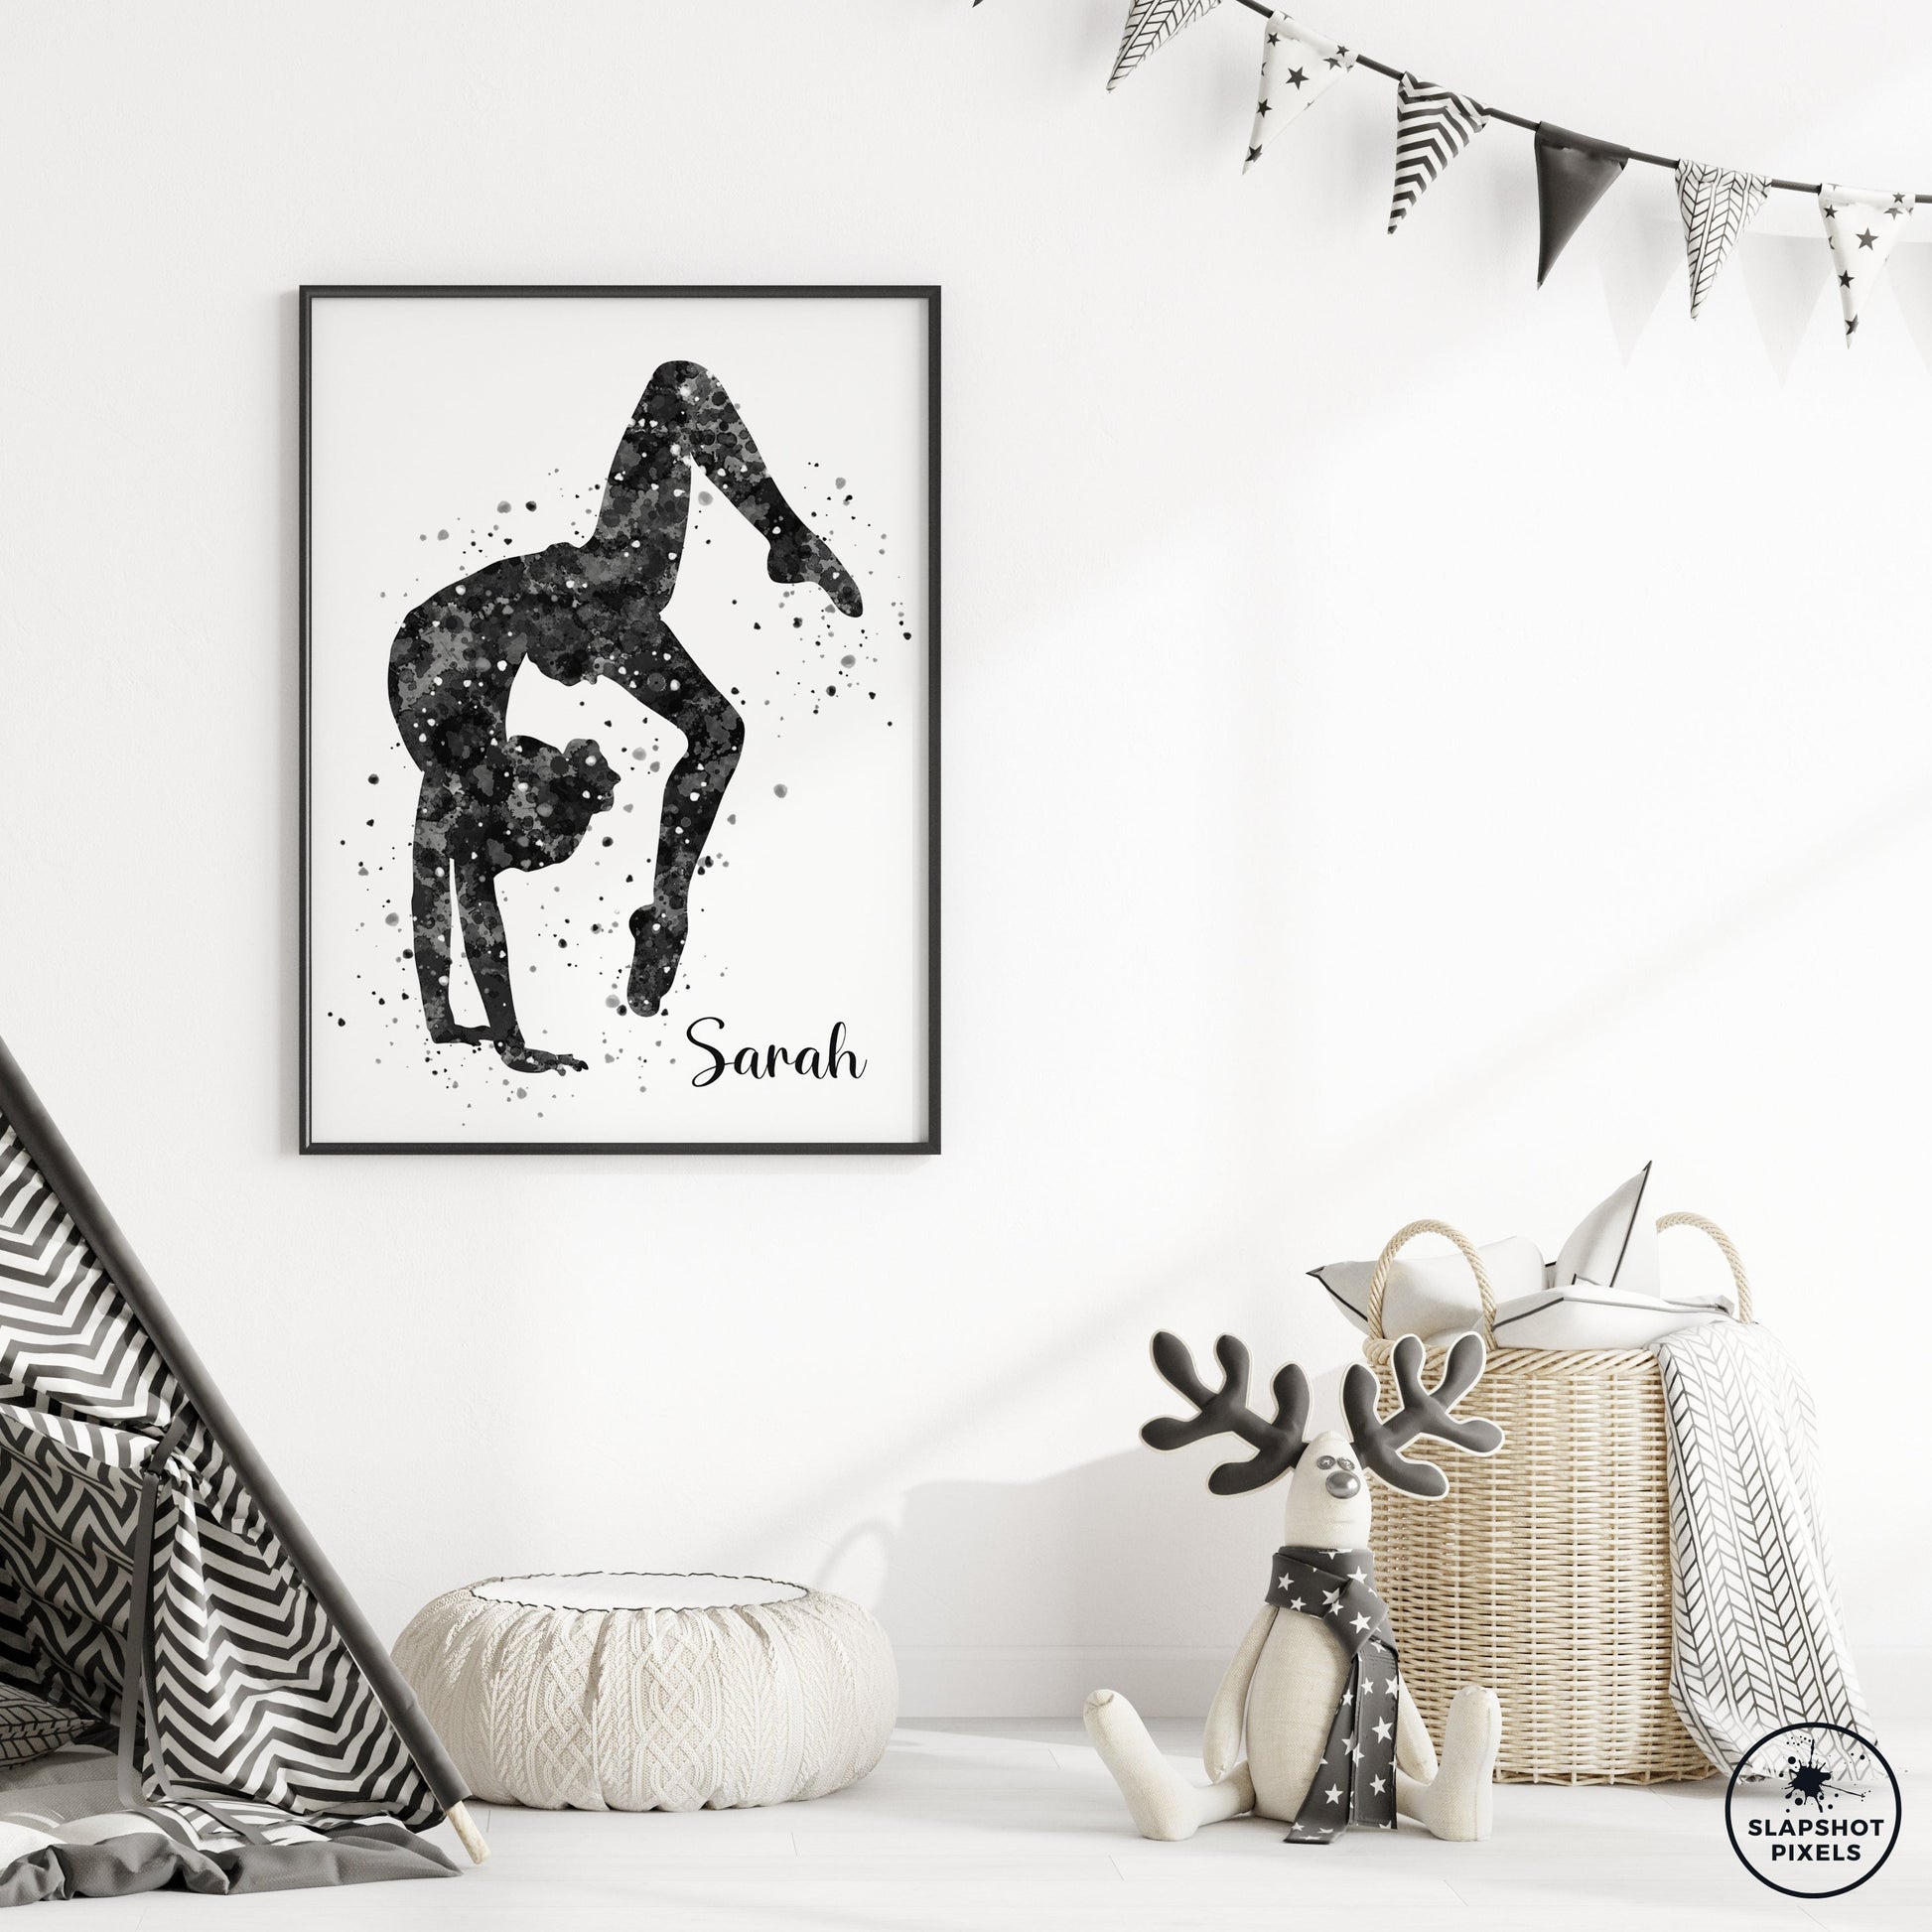 Personalized gymnastics poster showing girl bending backwards with a custom name under her. Designed in black and white watercolor splatters. Perfect gymnastics gifts for girls, gymnastics prints, dance wall art décor in a girls bedroom and birthday gifts for girls.